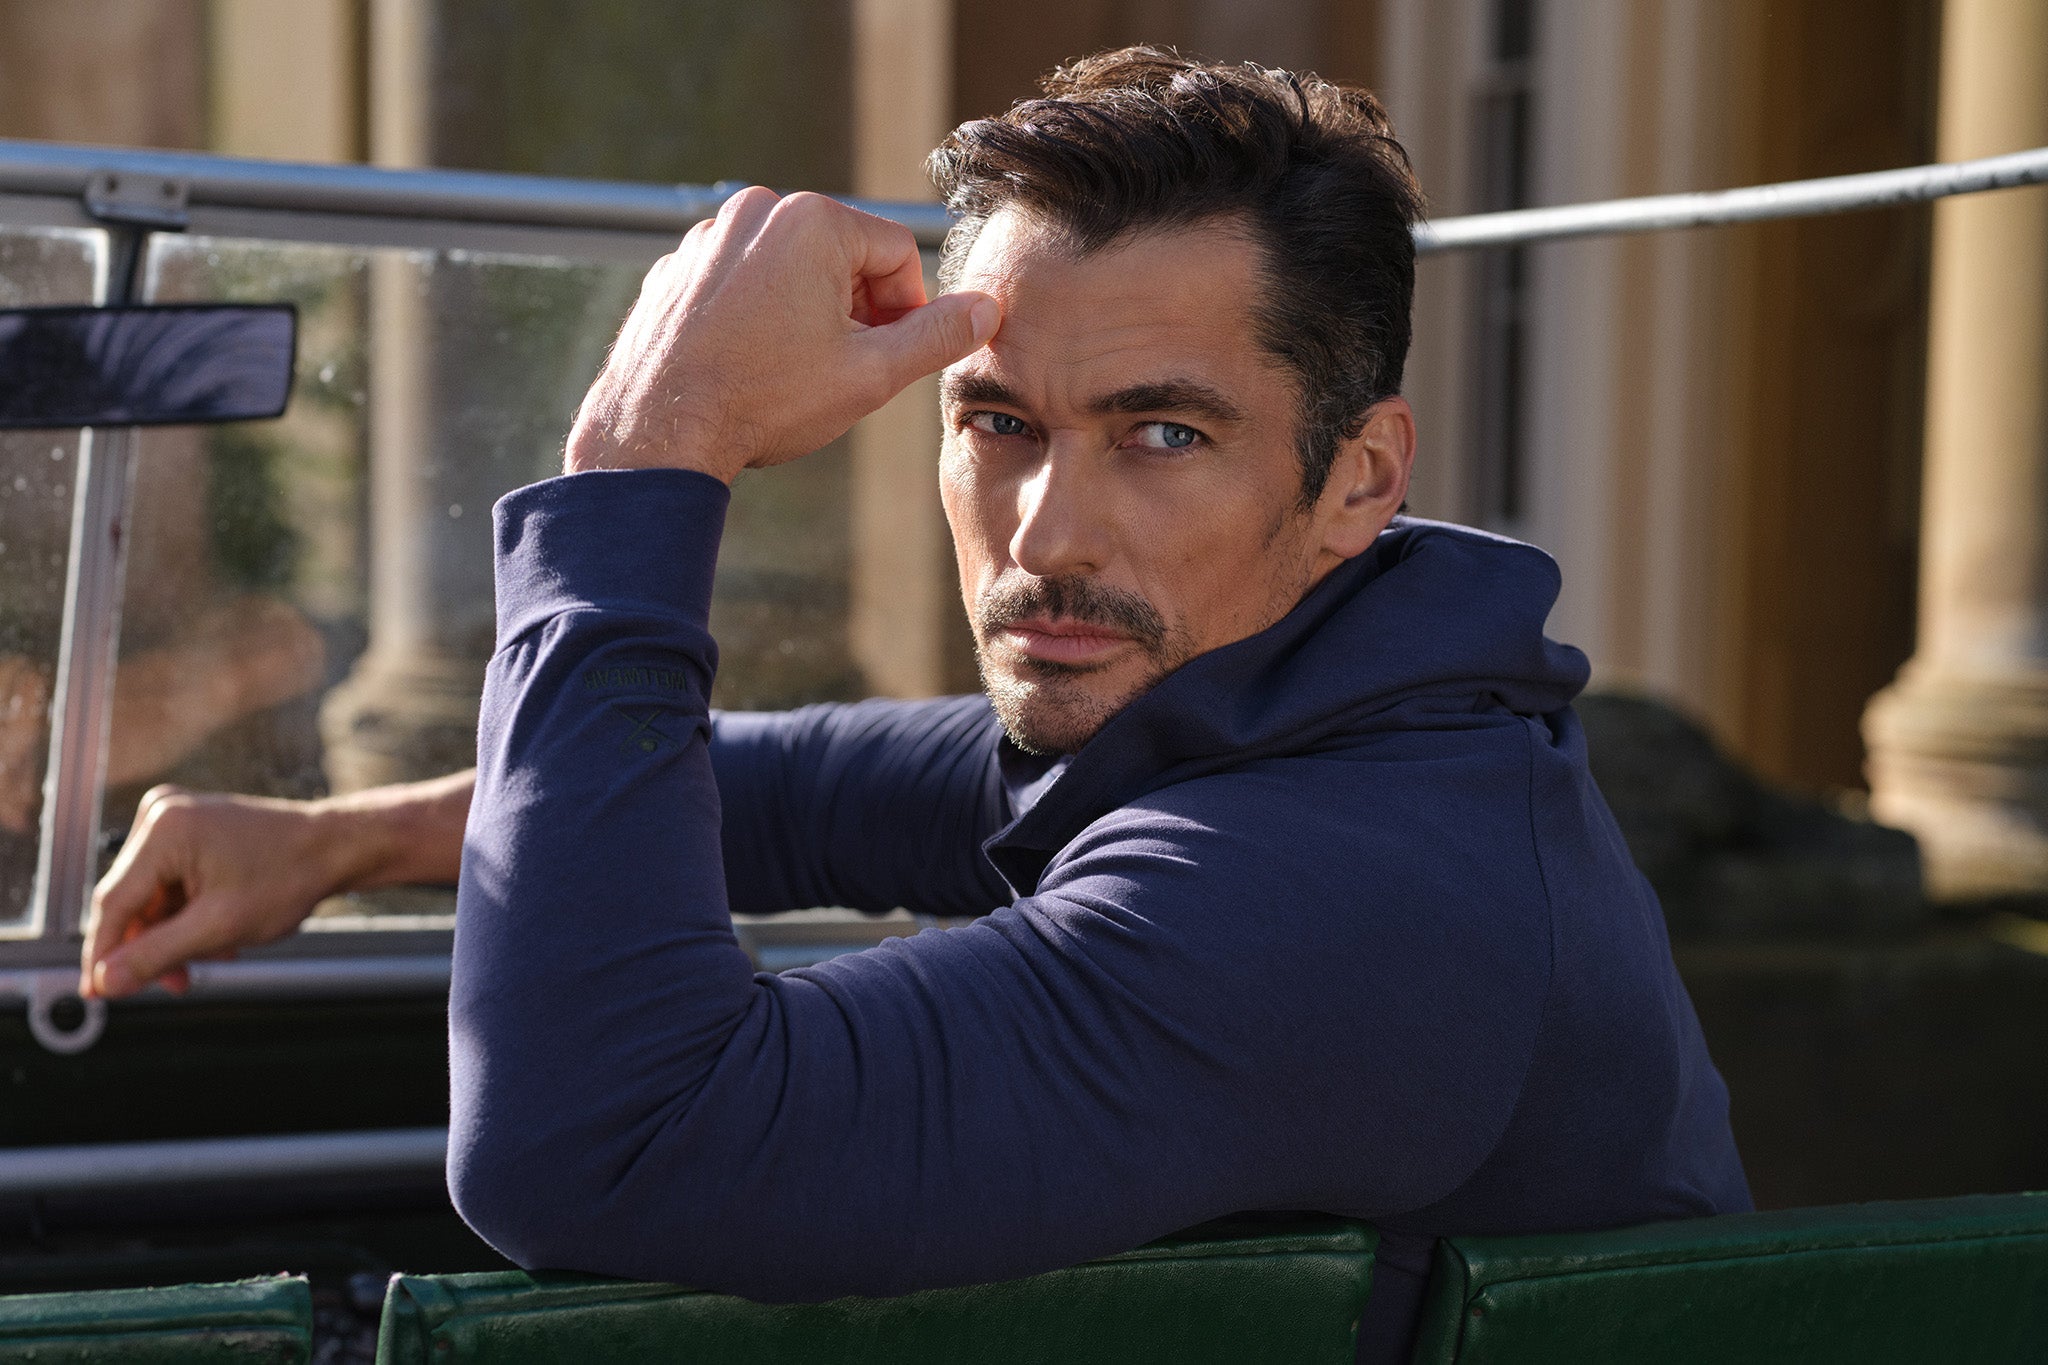 Blue steel: David Gandy may have endured endless Zoolander comparisons but he’s more than just a pretty face